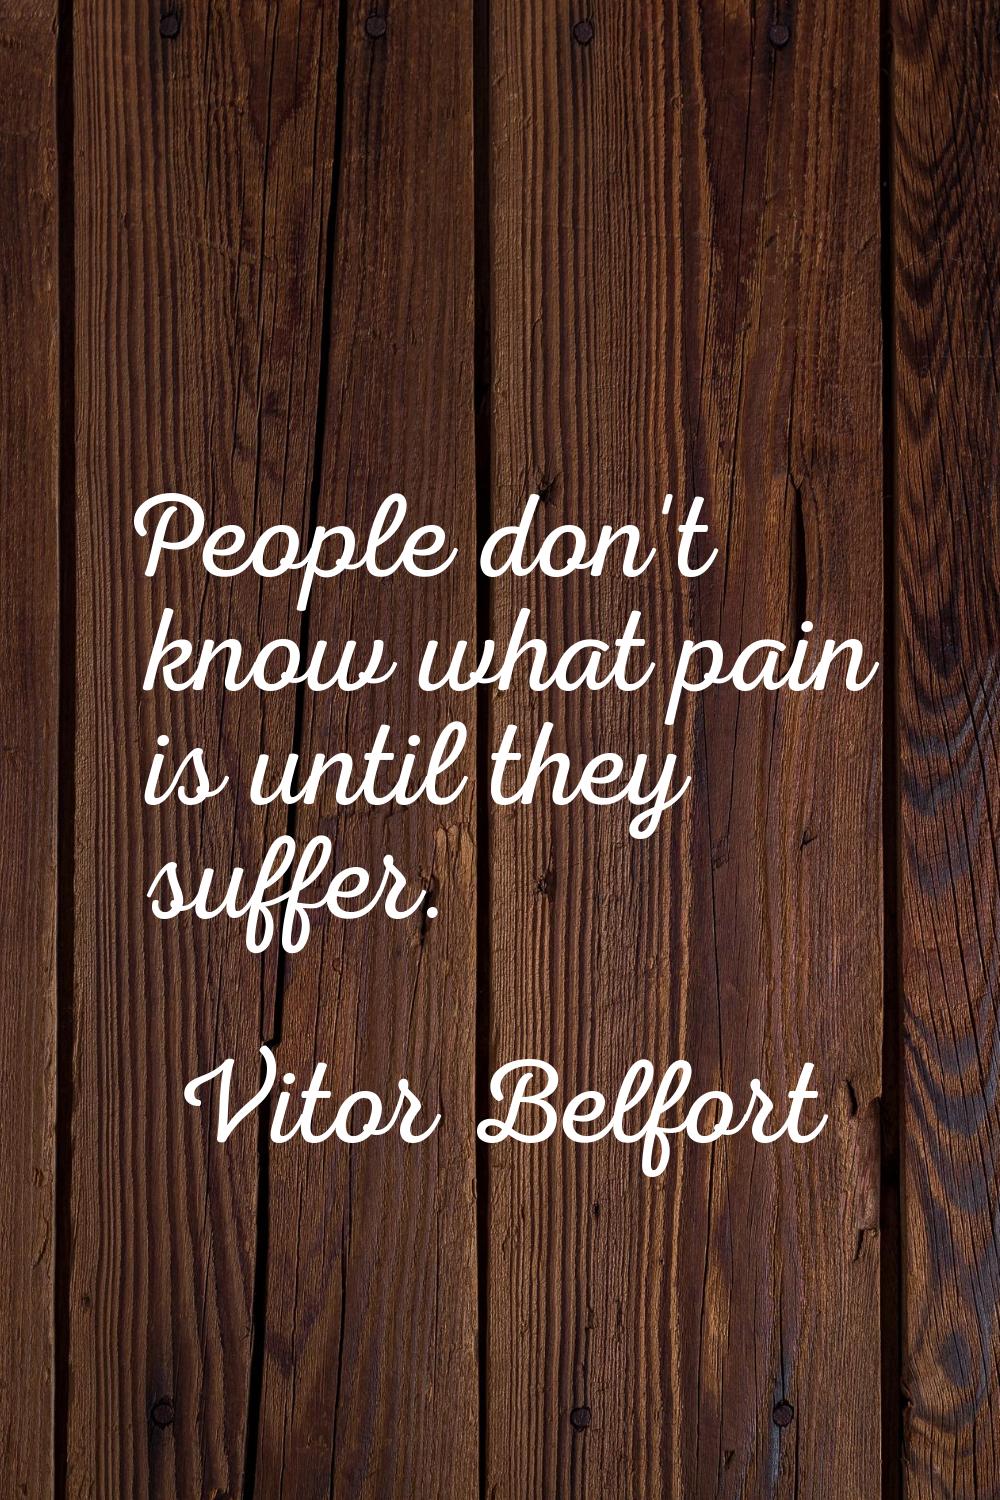 People don't know what pain is until they suffer.